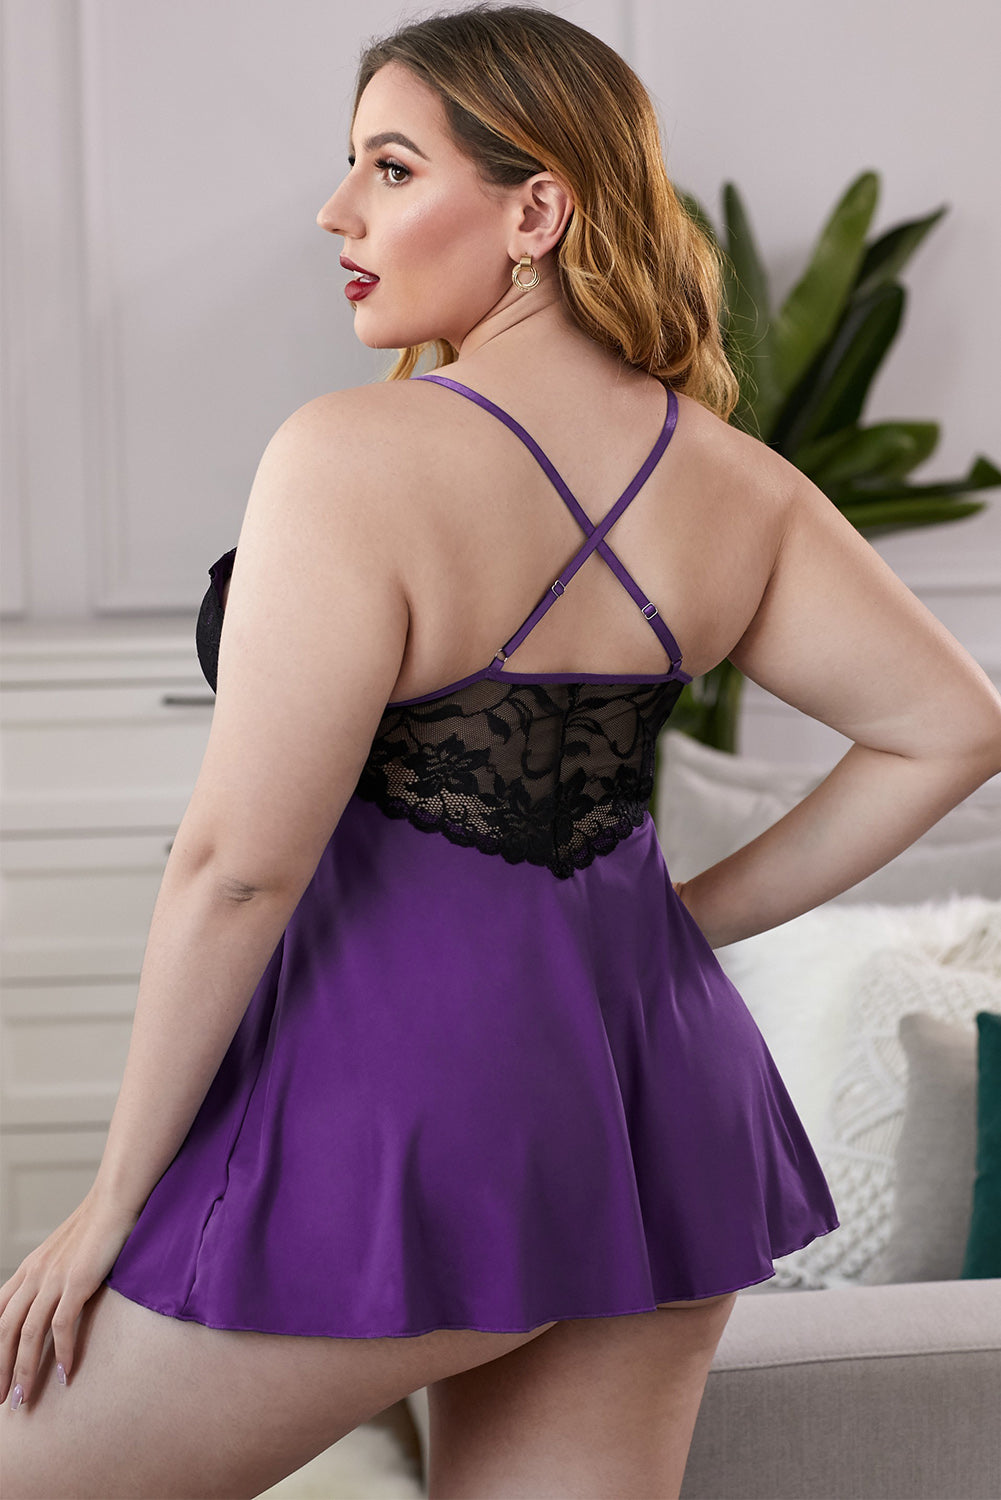 Lace See-Through Plus Size Chemise - LOLA LUXE